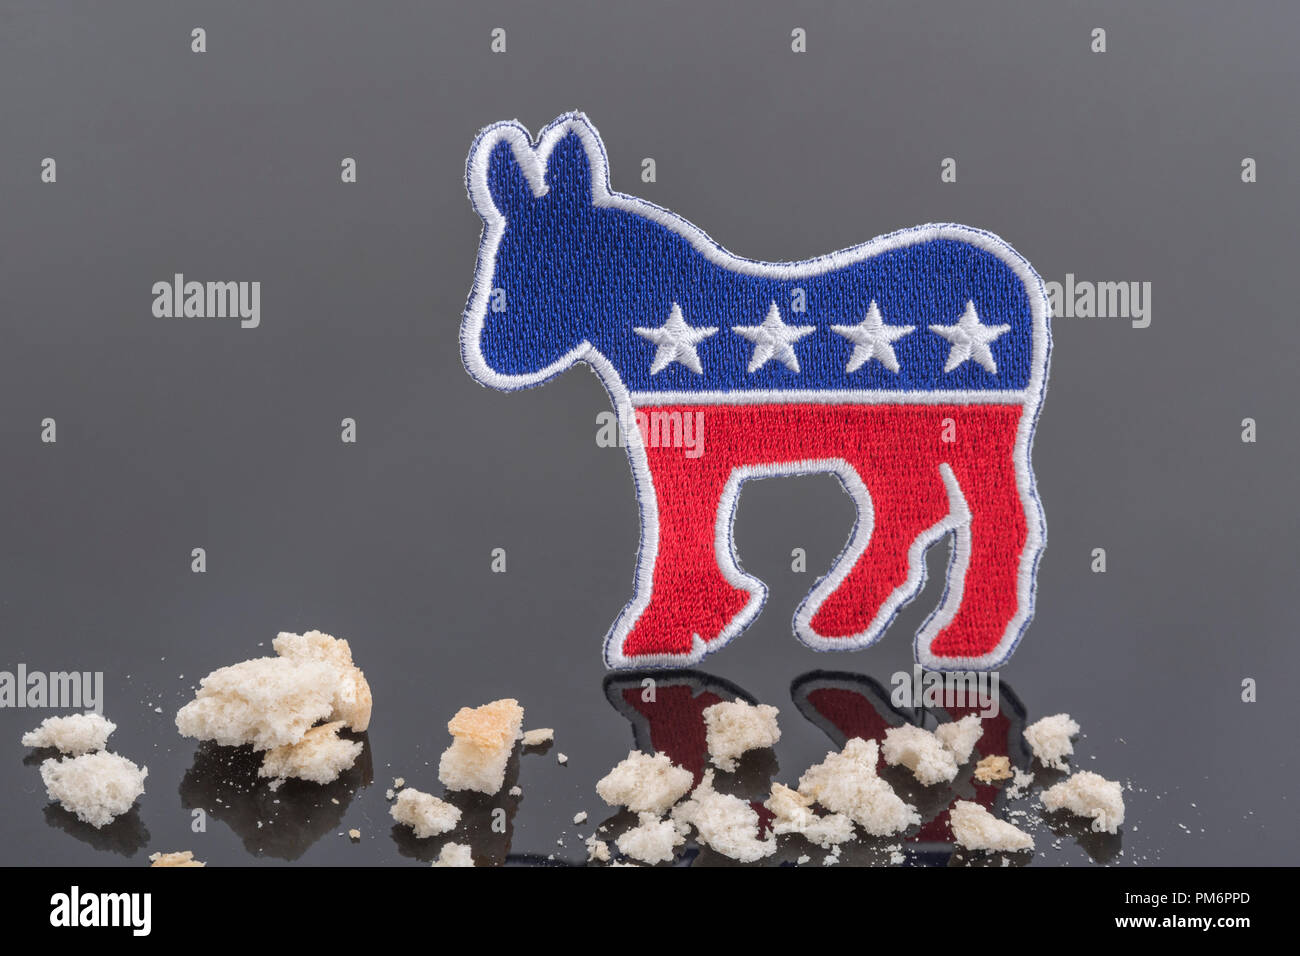 US Democrat donkey & breadcrumbs - in reference to Speaker Nancy Pelosi's comment on Trump employee bonuses being mere 'crumbs' & Jan 6th blame trail Stock Photo